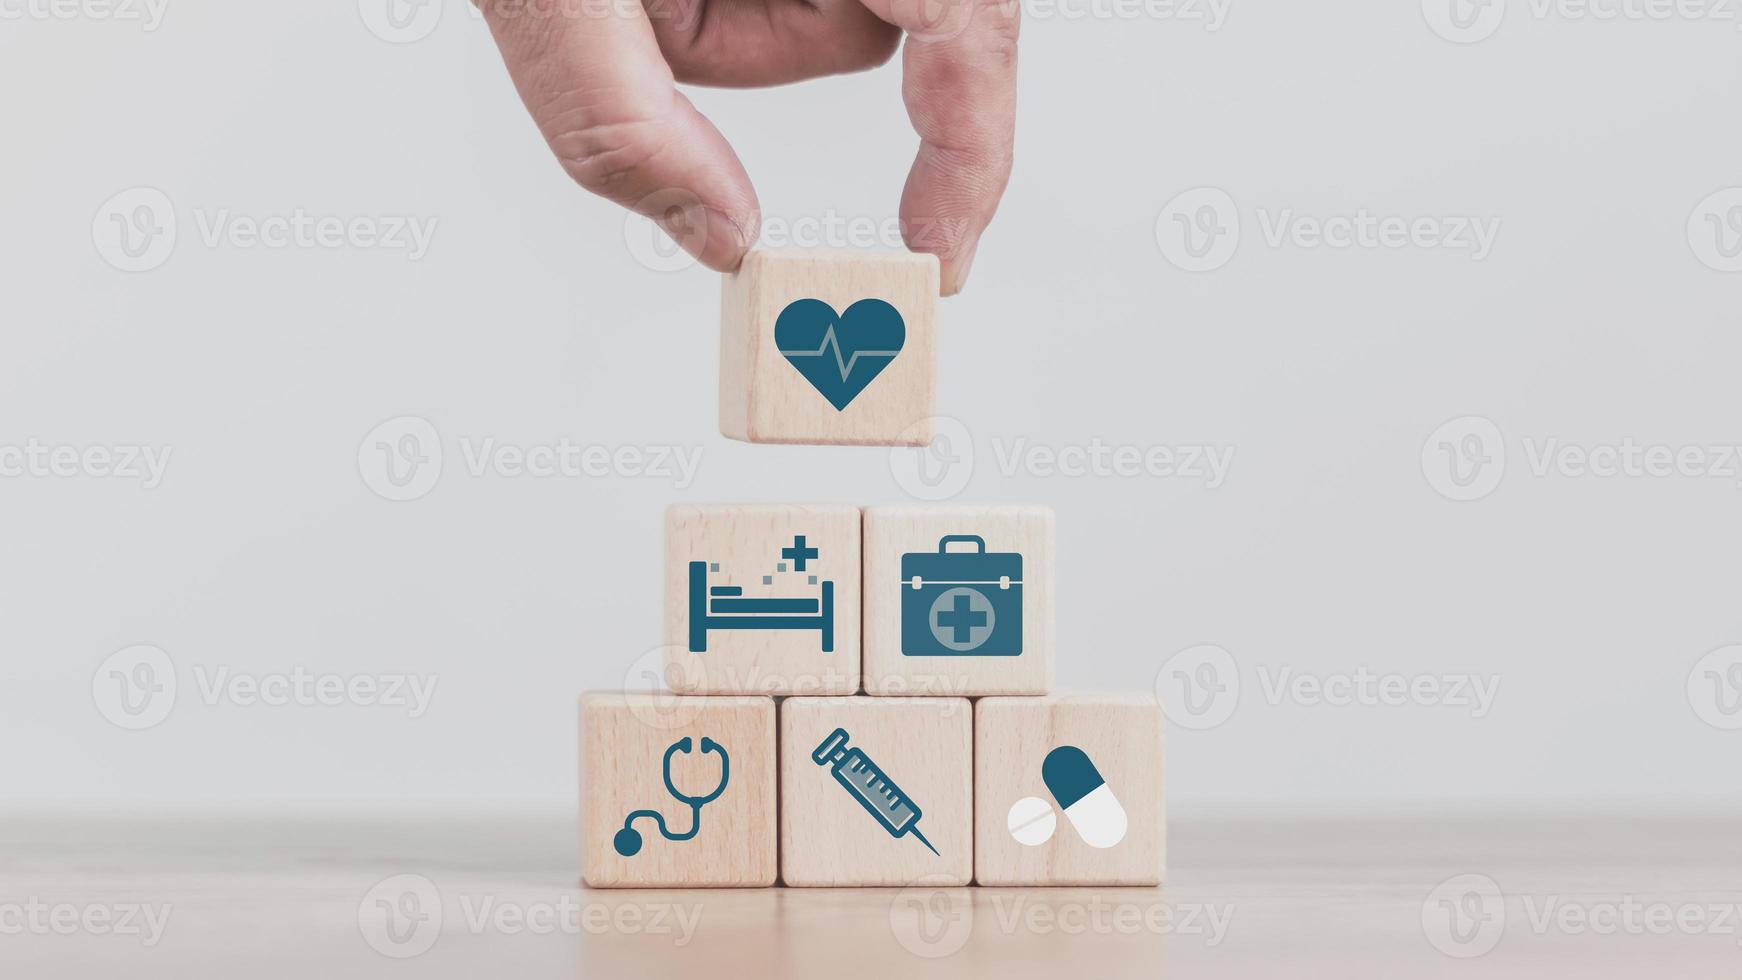 insurance concept, a man's hand is building a cube wood to show the decision about life insurance to plan the future for themselves and their families on money, health and tax breaks. photo